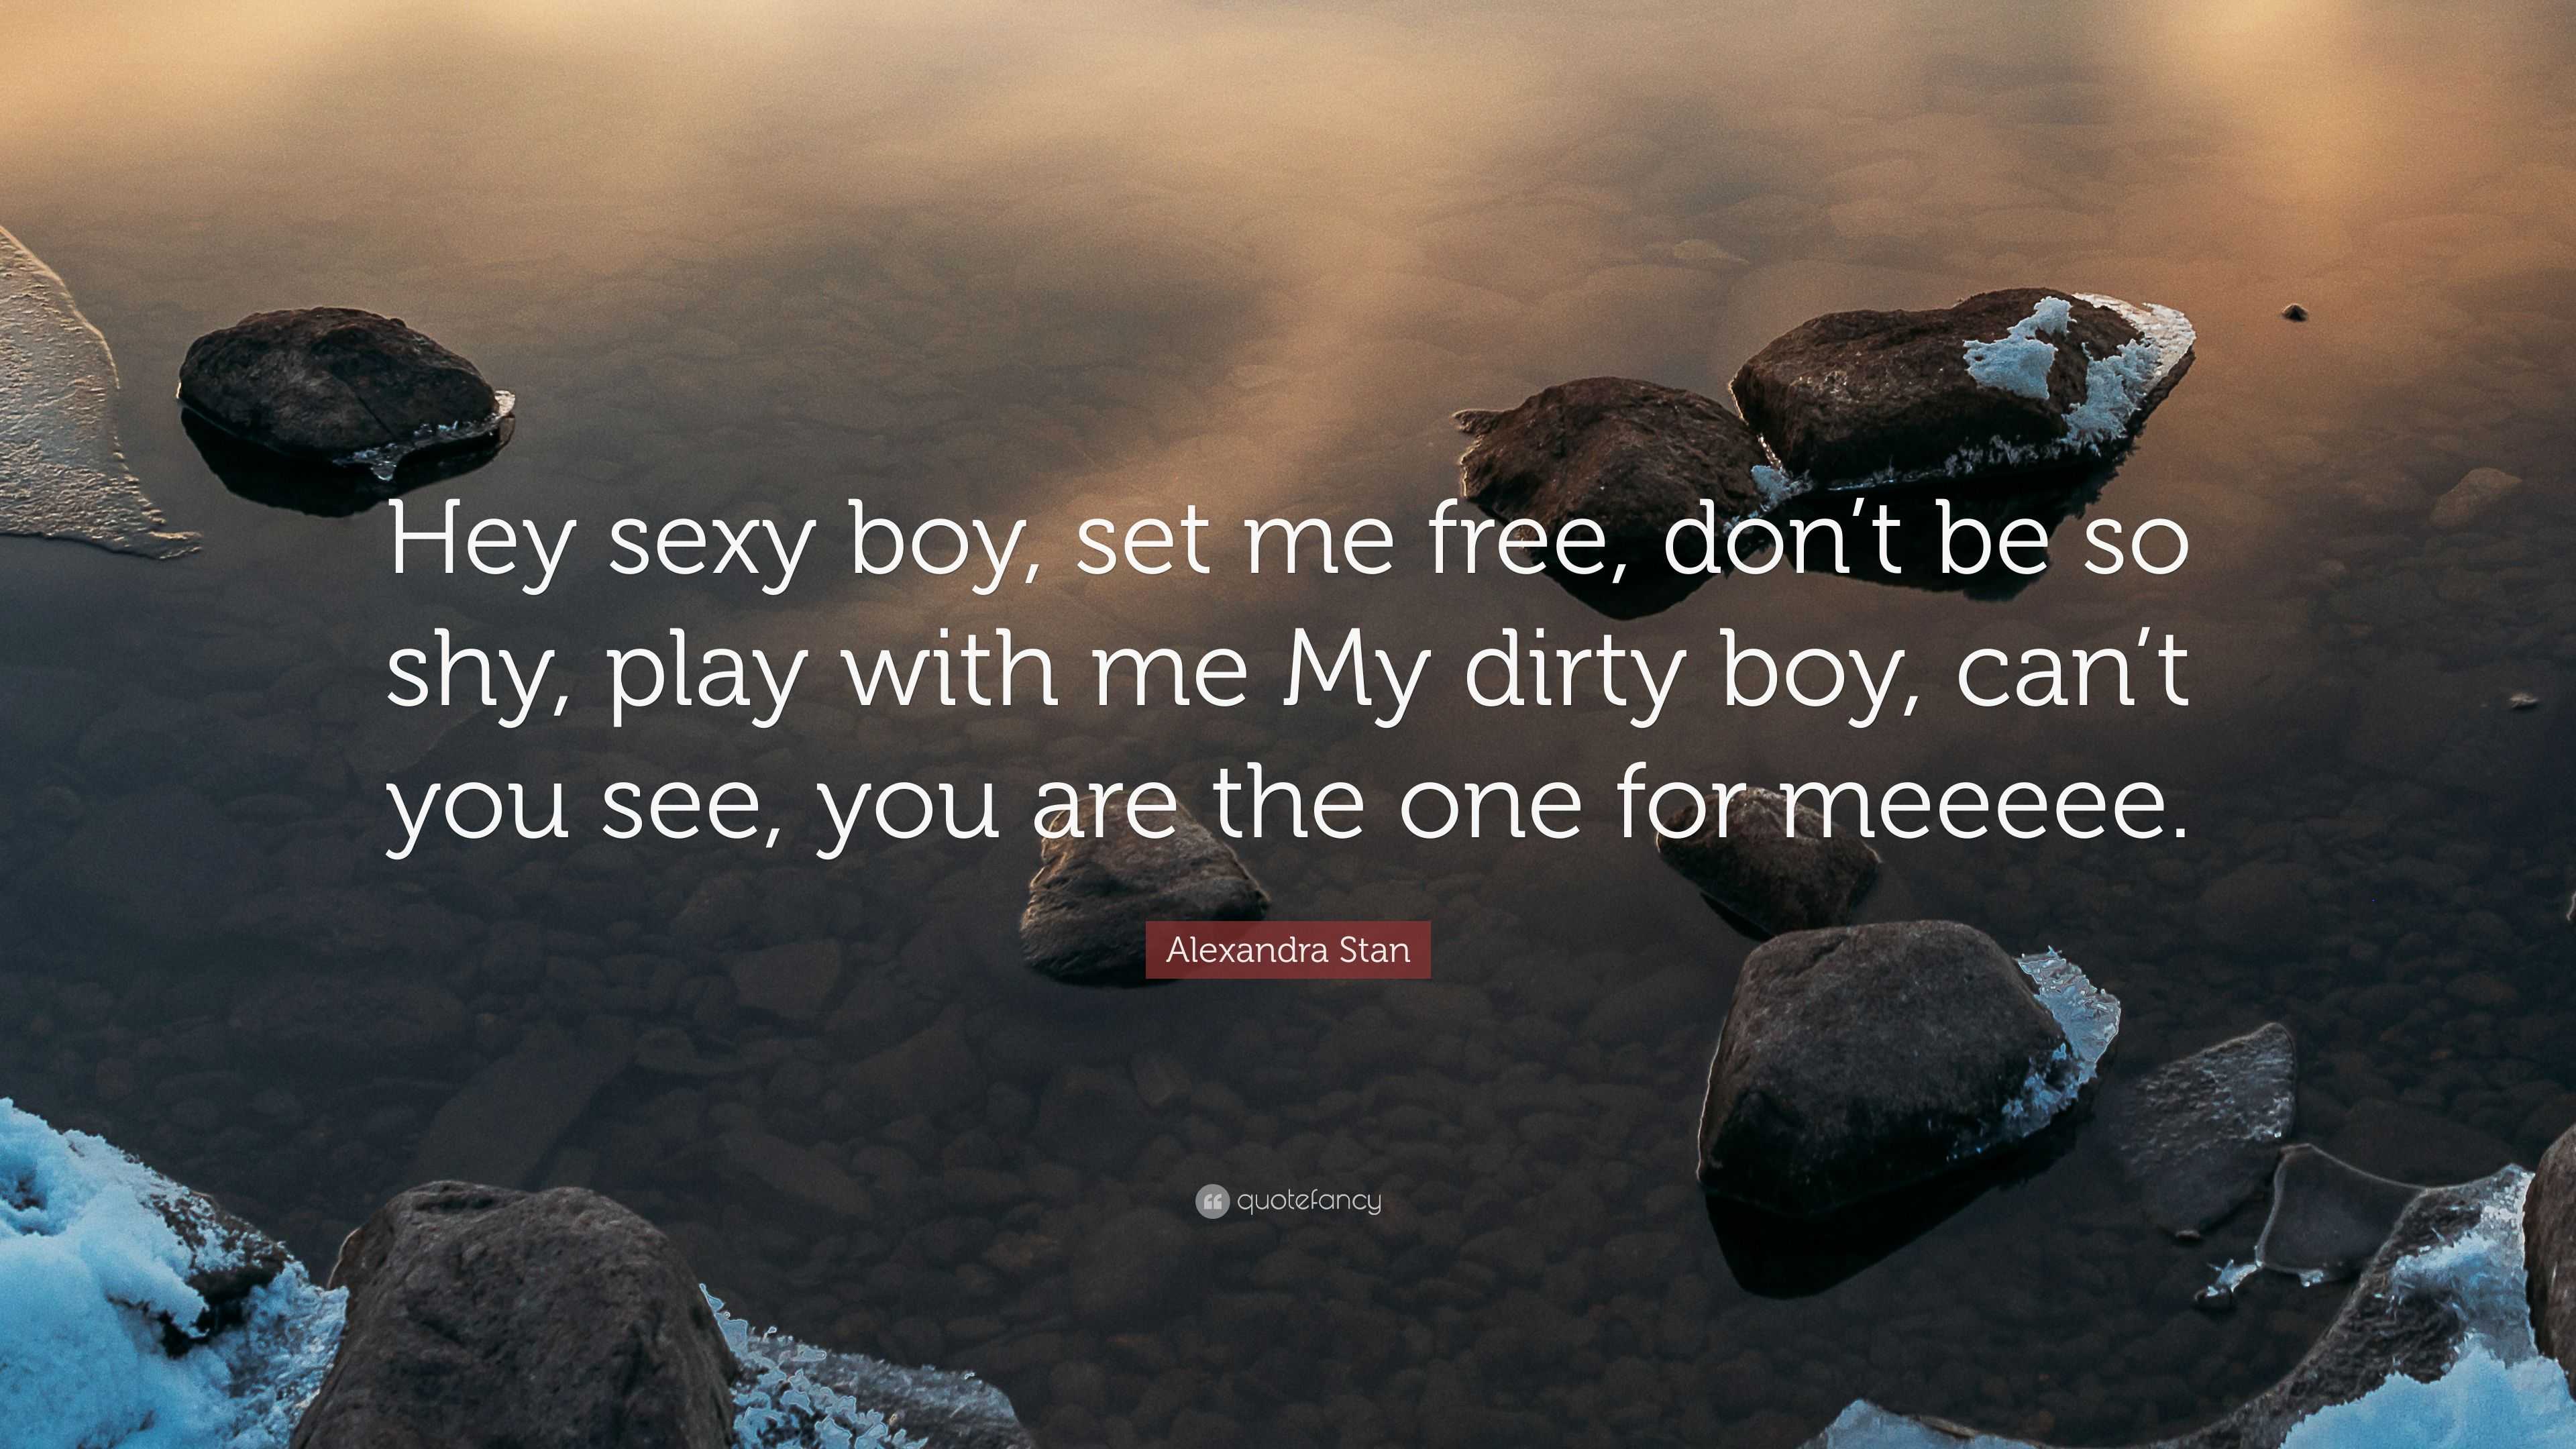 Alexandra Stan Quote: “Hey sexy boy, set me free, don't be so shy, play with